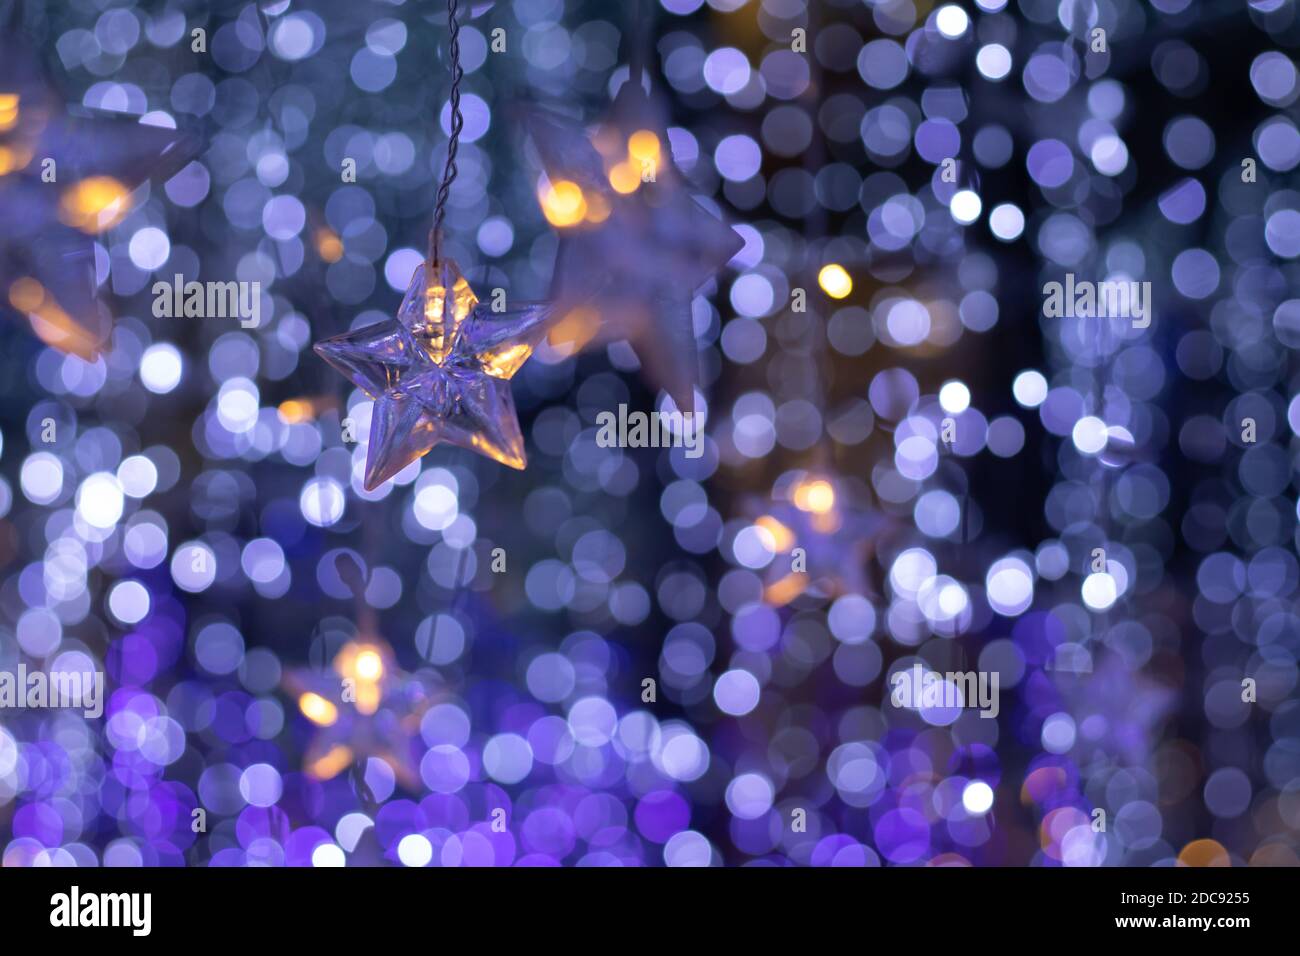 Rain of bokeh lights and star shaped ornaments with a dark bluish background Stock Photo